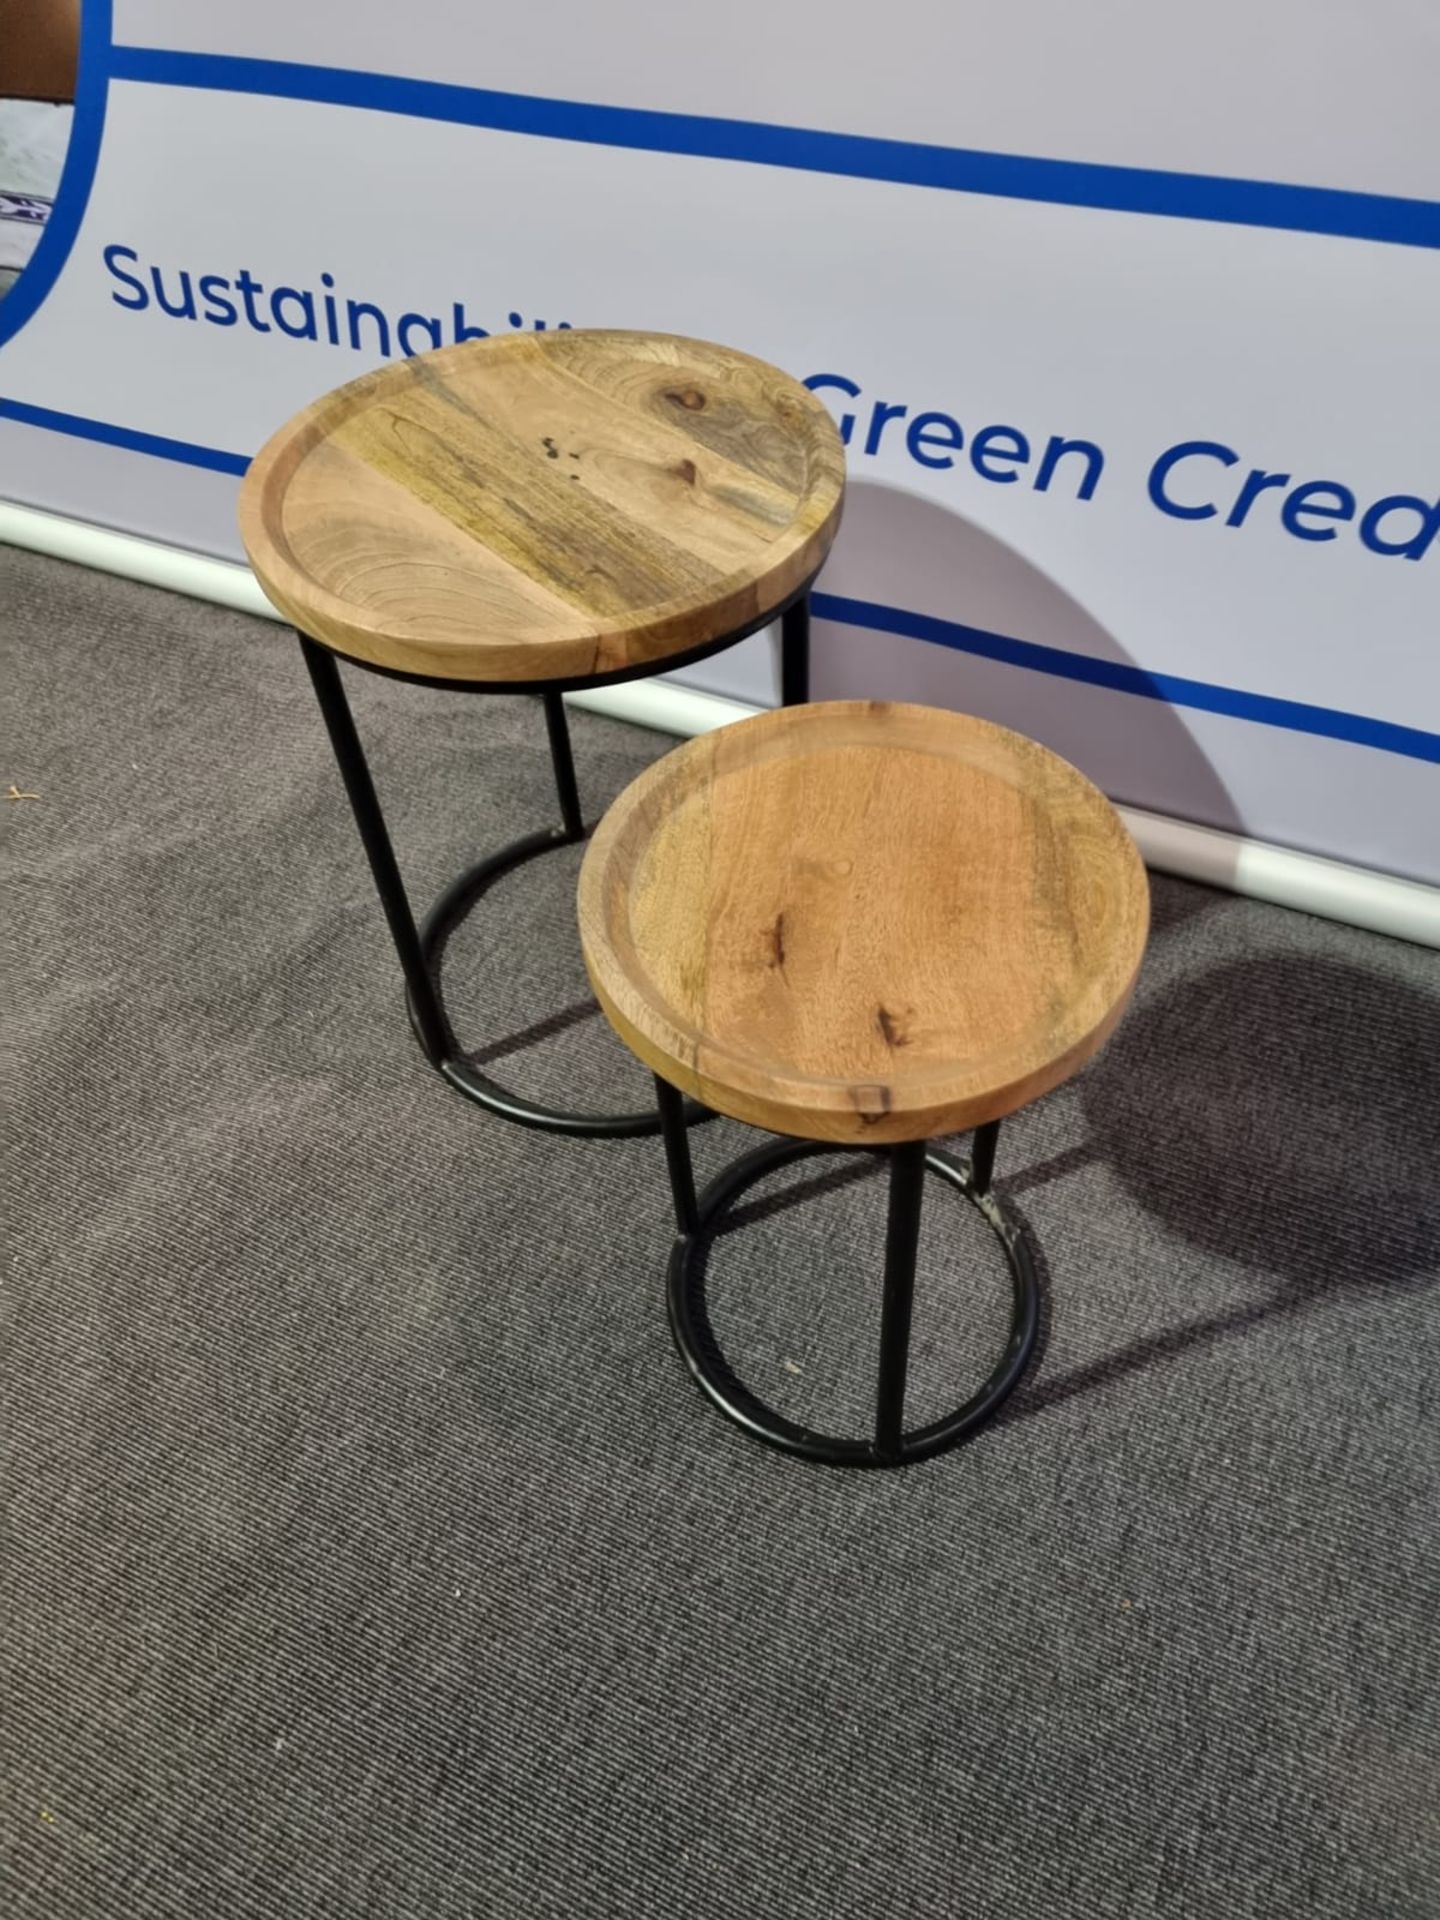 Round Iron & Wood Nest Tables Part Of The Railtrack Collection, The Industrial Inspired Tables - Image 2 of 4